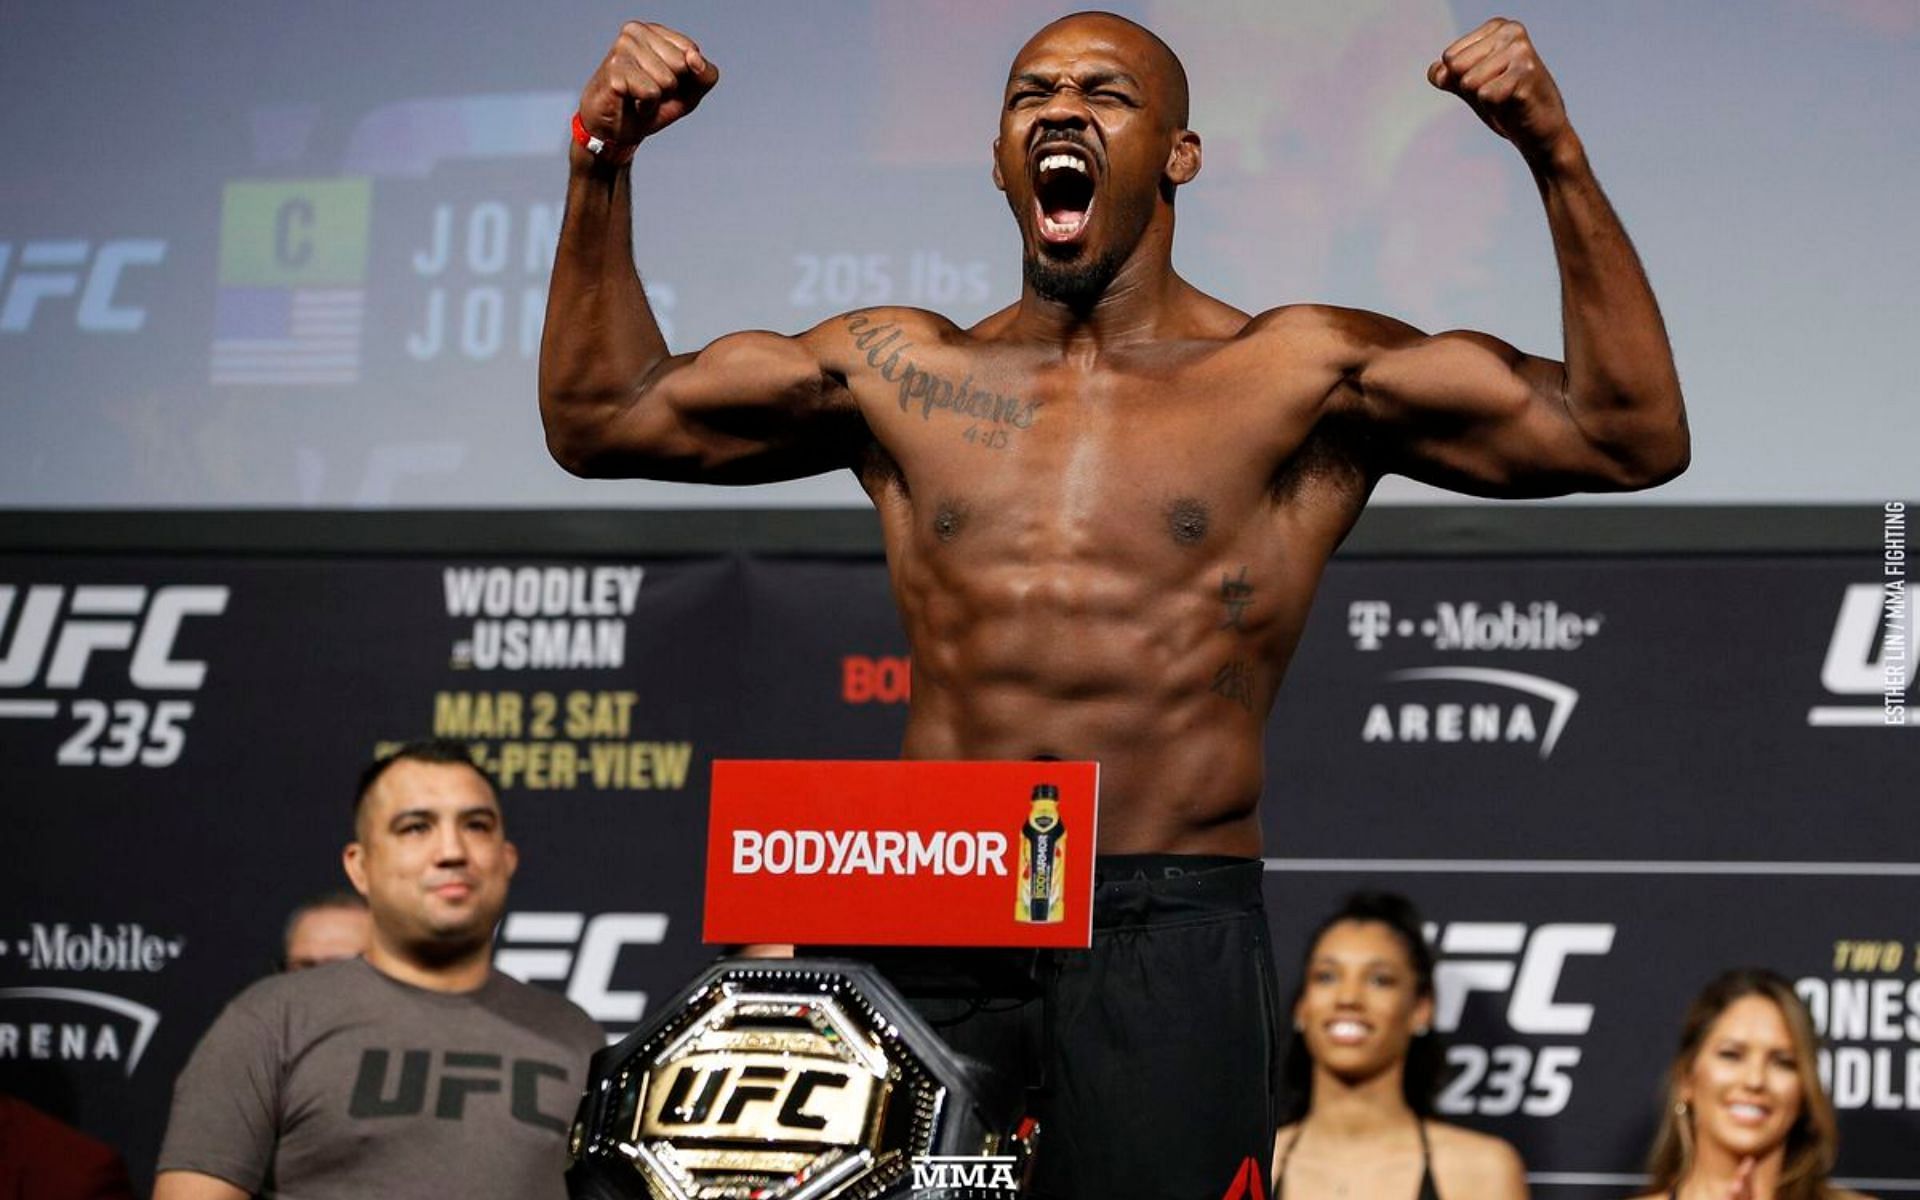 Jon Jones looks set to make his long-awaited move to heavyweight, but will it end in success or failure?